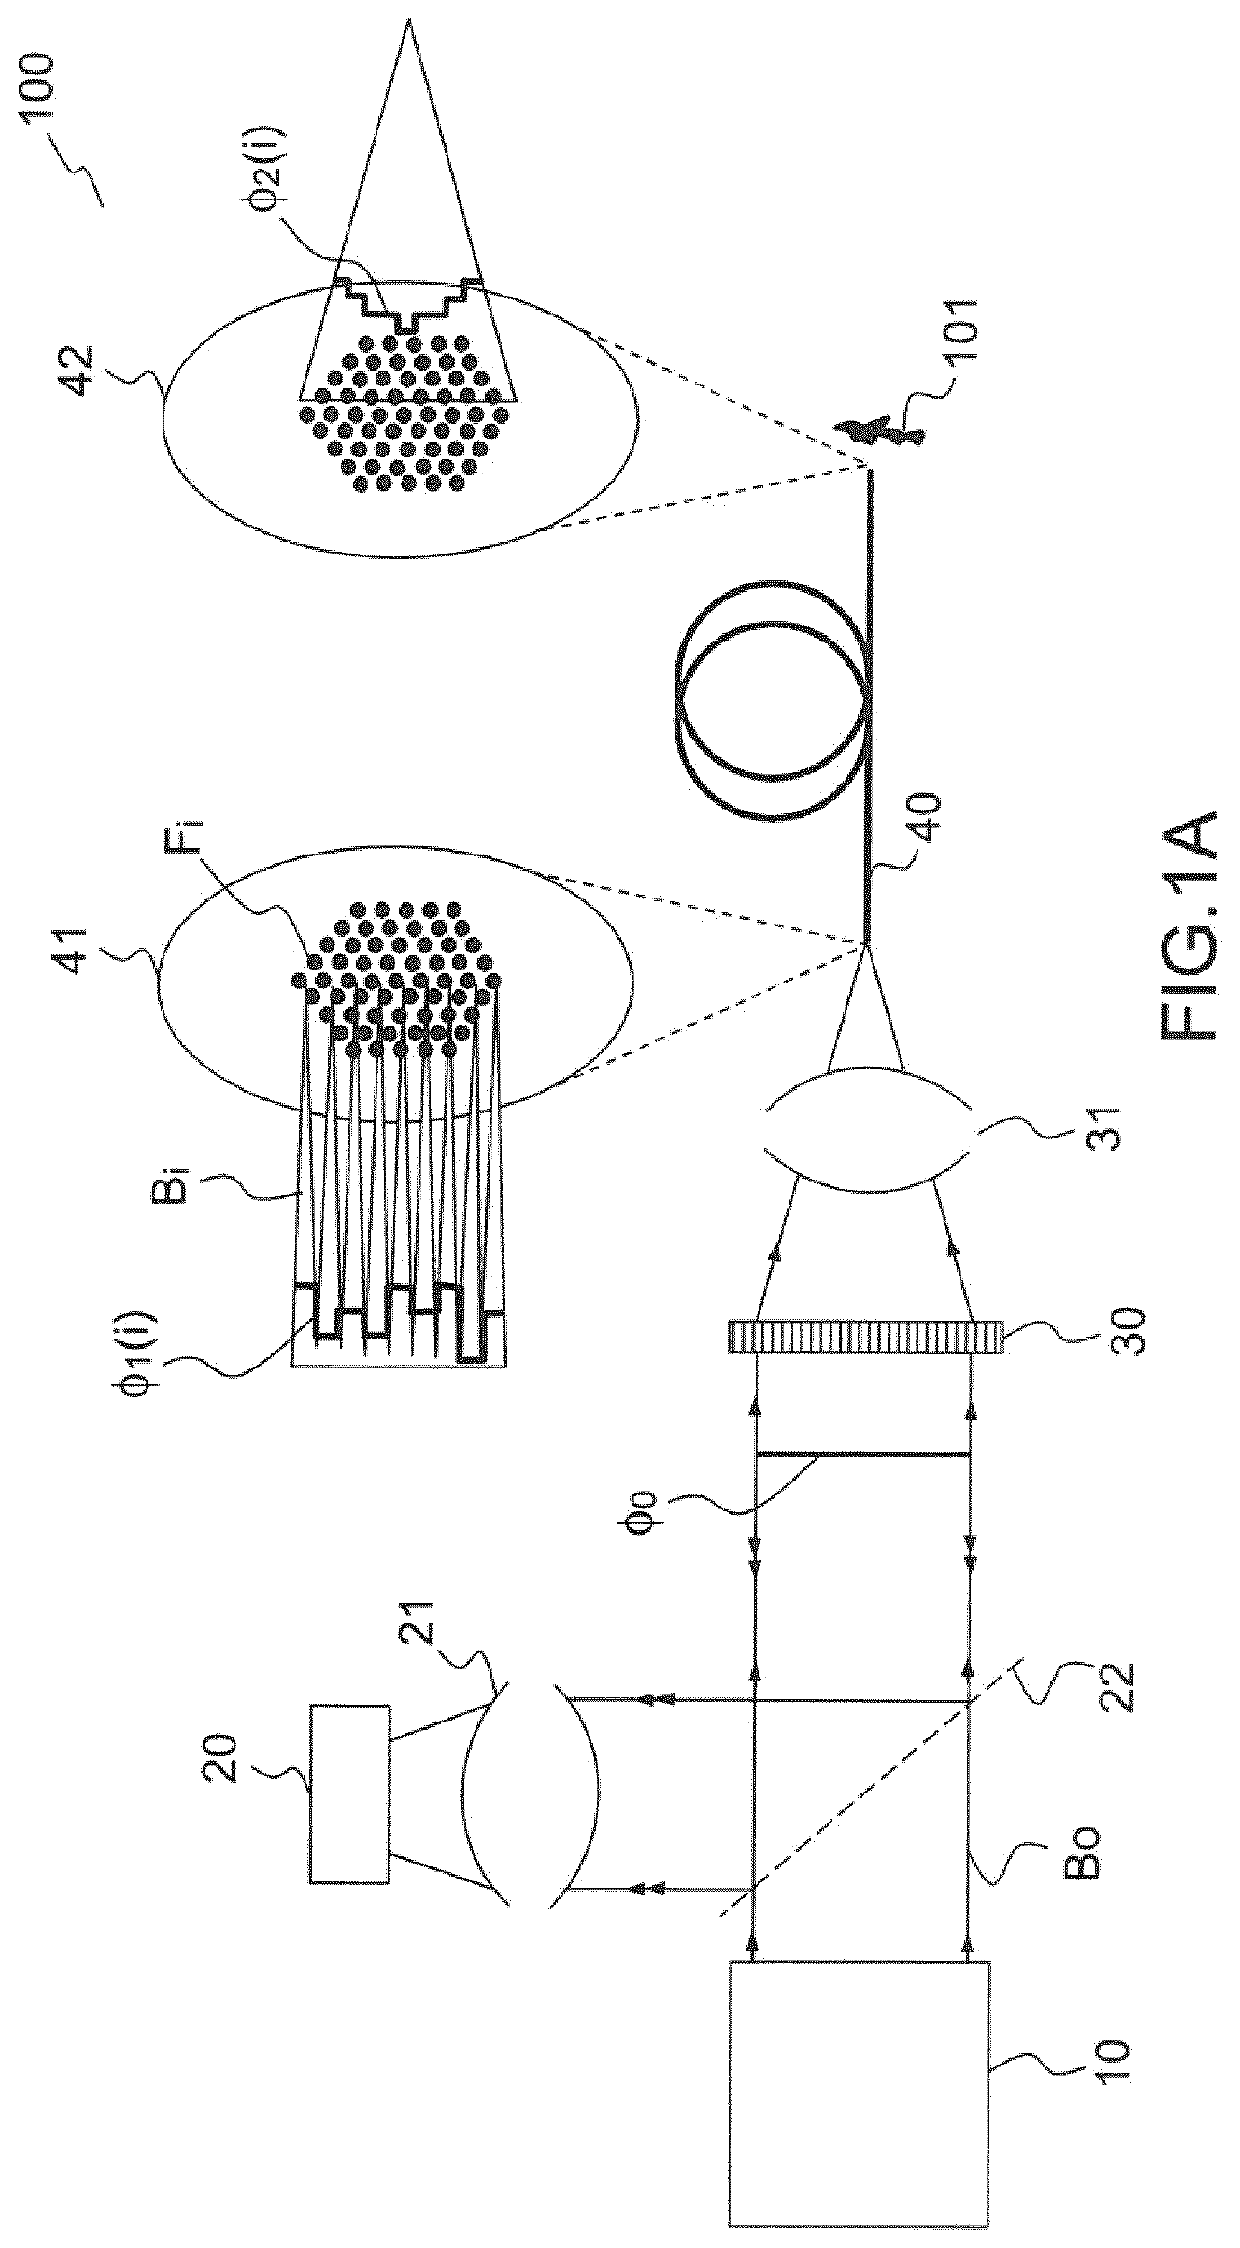 Devices and methods for conveying and controlling light beams for lensless endo-microscopic imagery